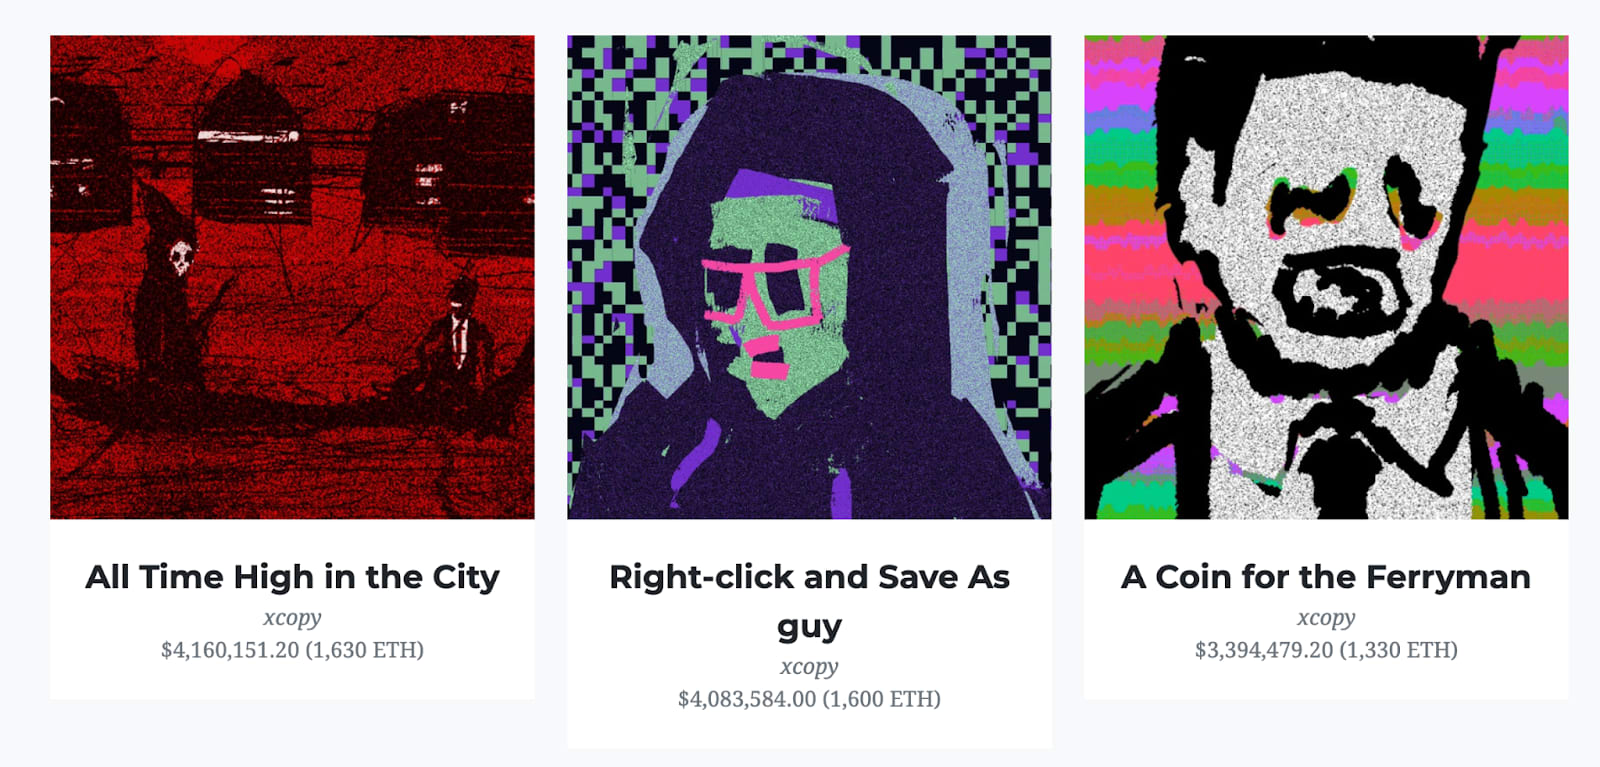 The top 3 sales in for XCOPY artwork